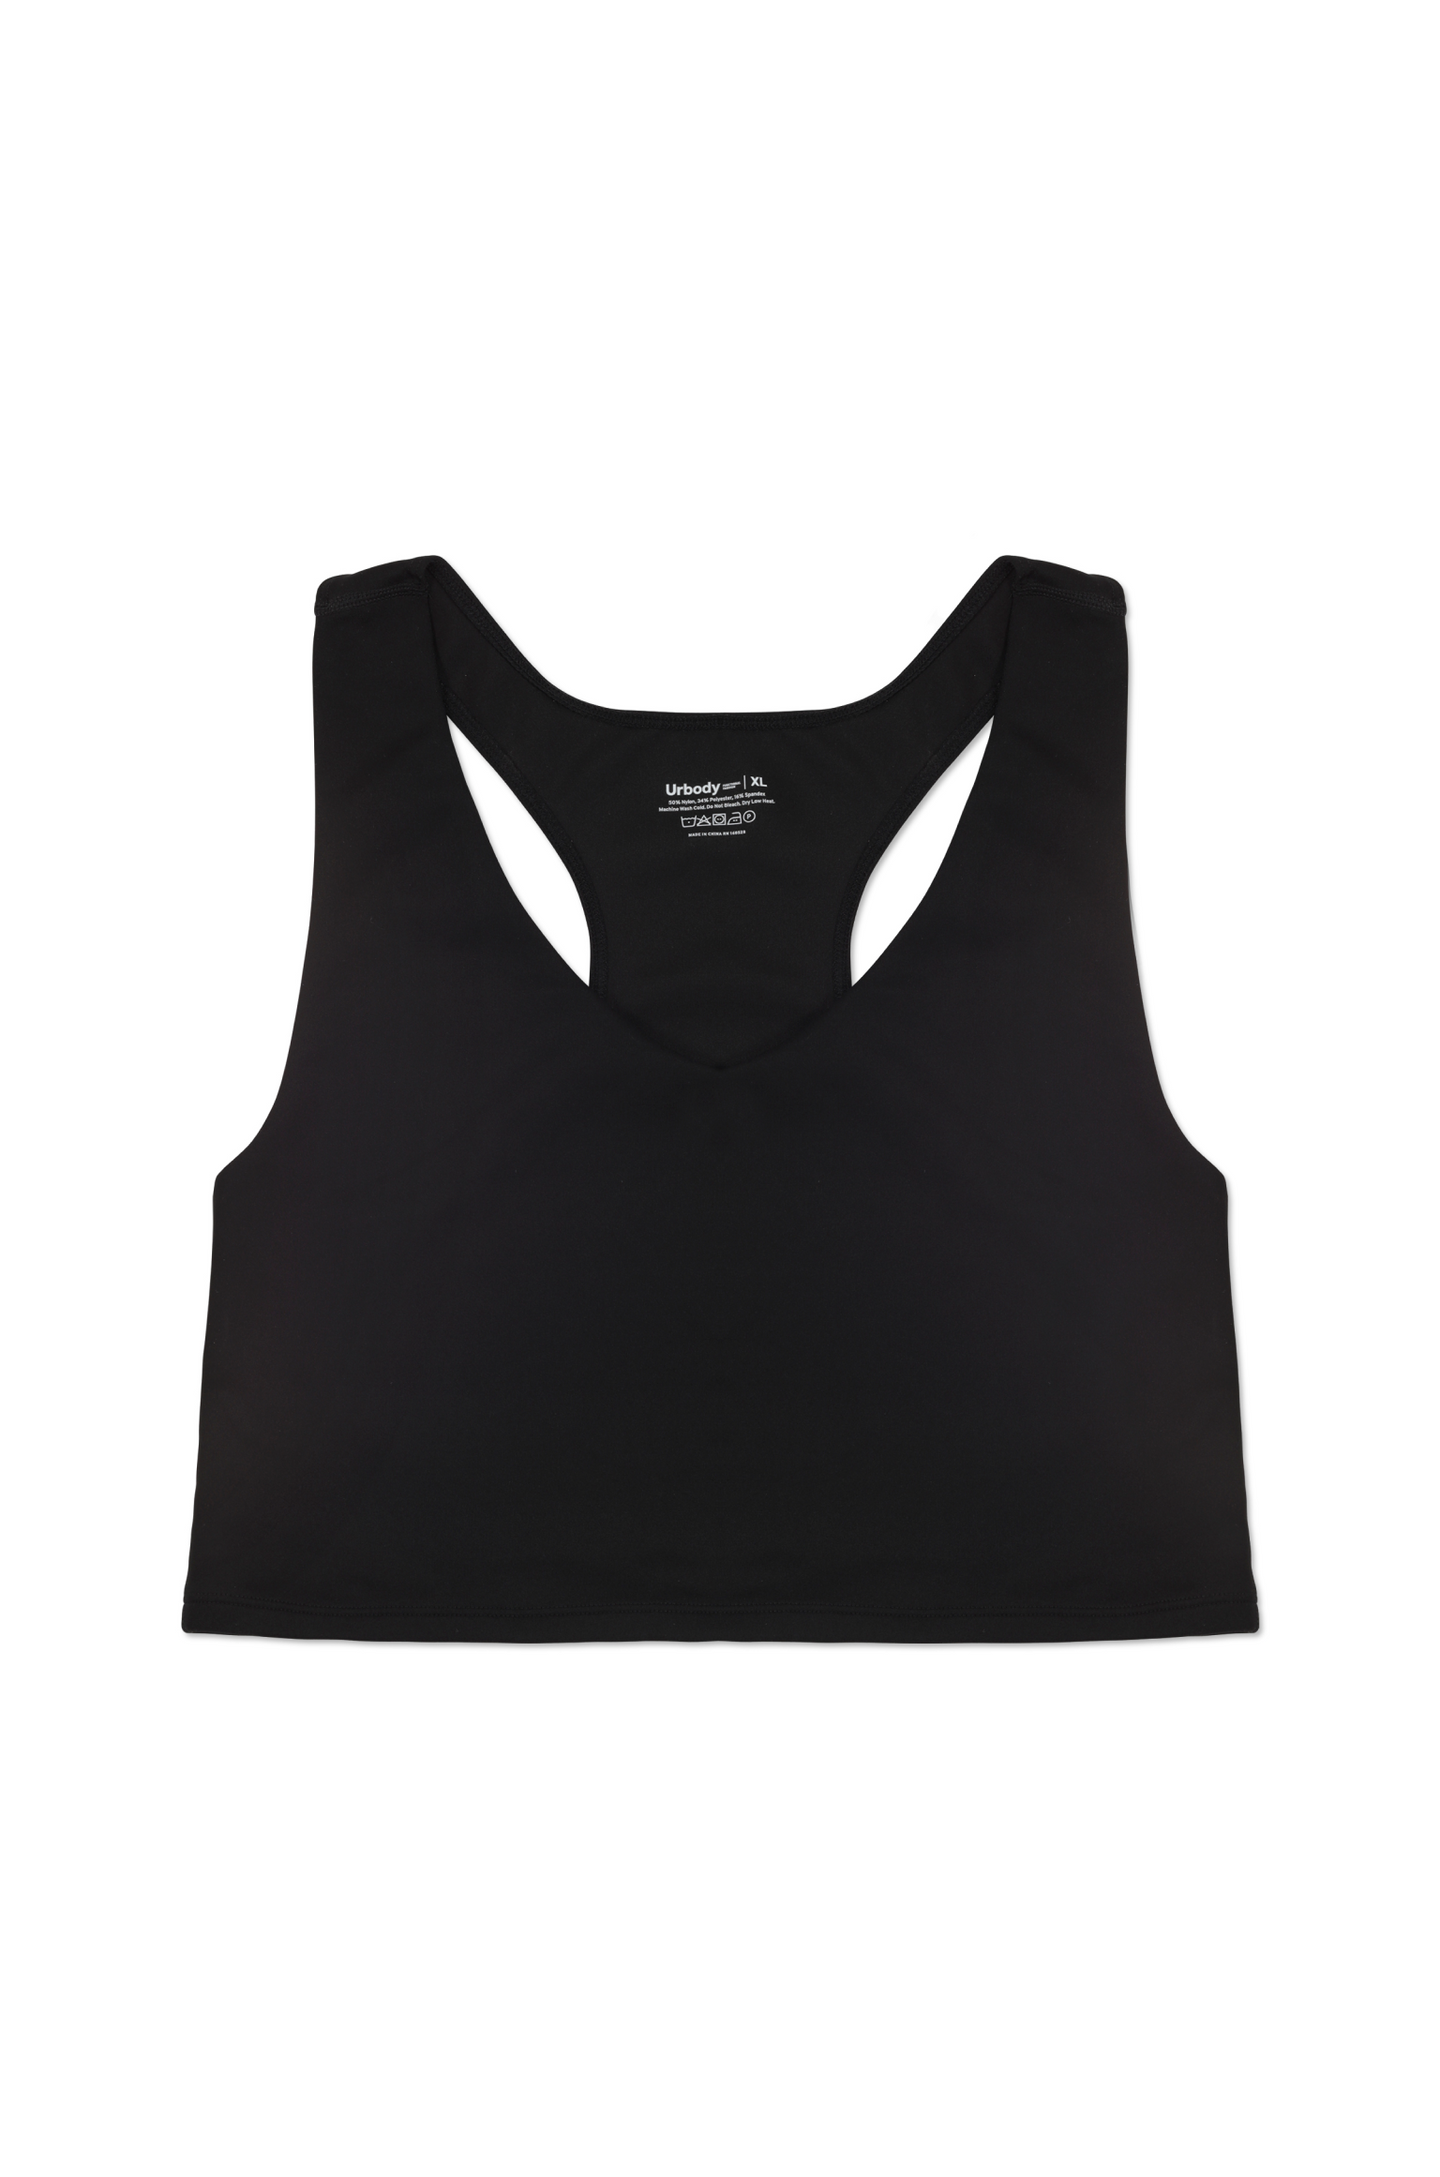 Racerback Compression Top – Urbody Functional Fashion